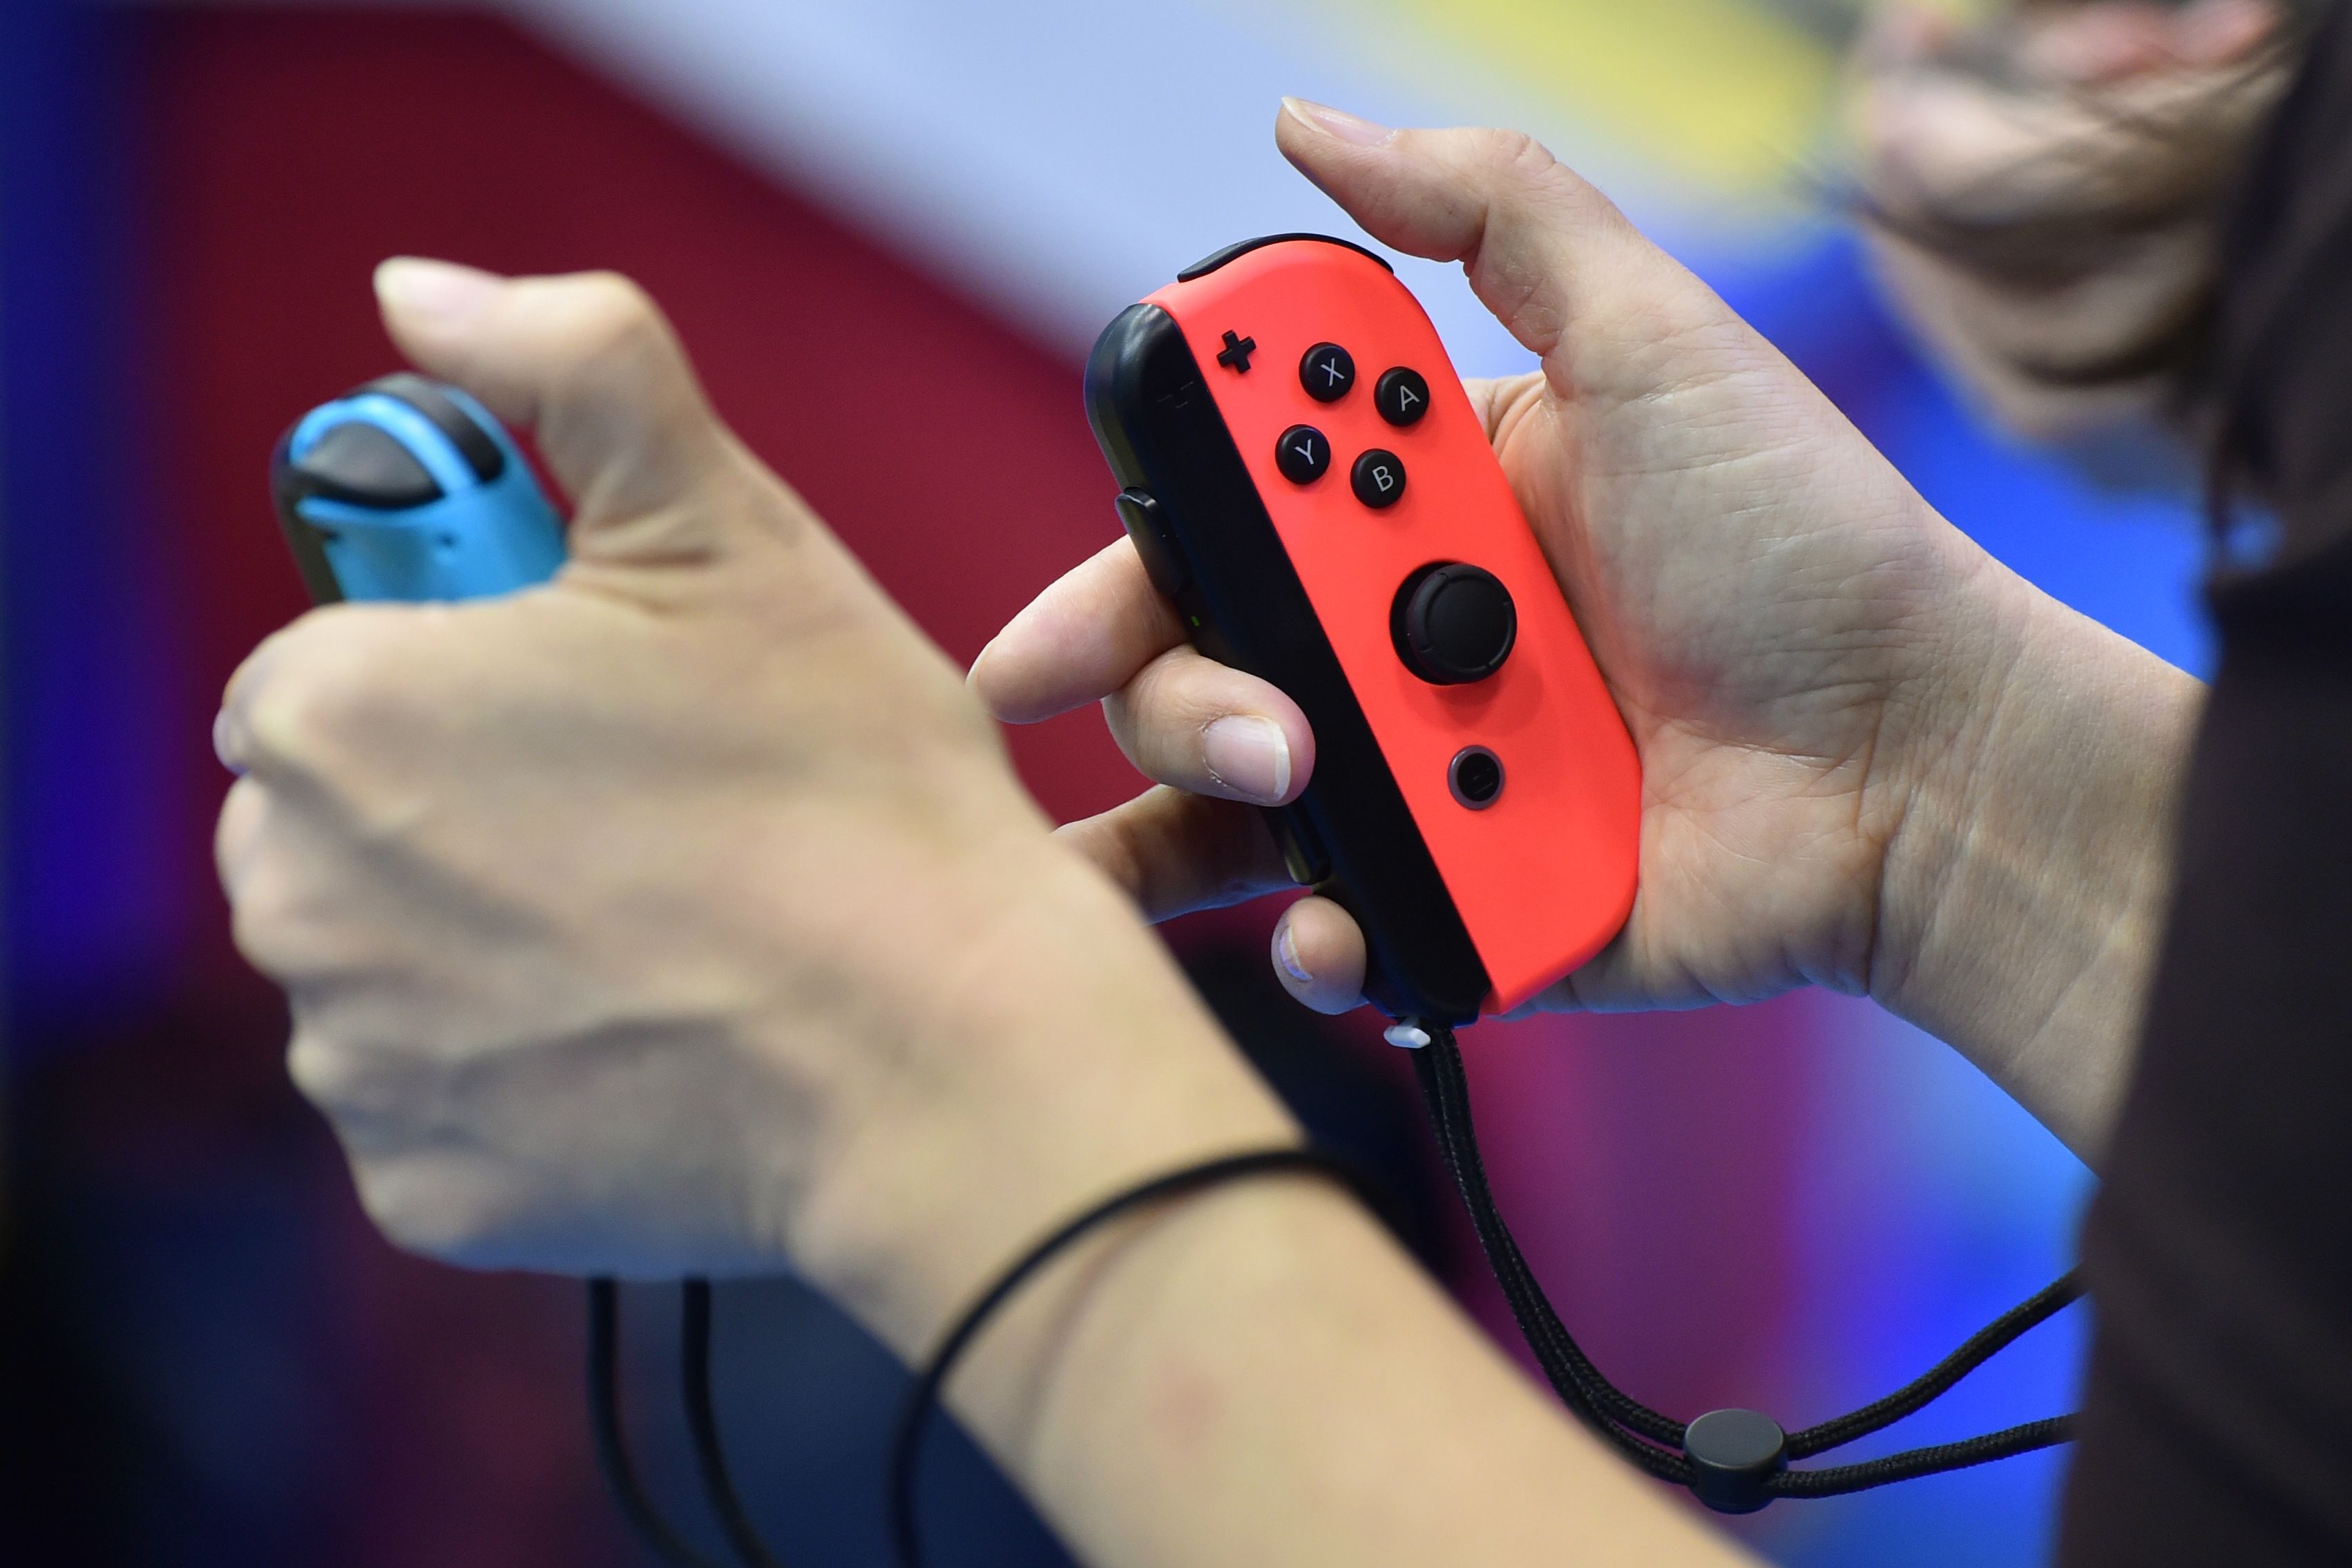 Visitors play Nintendo's new video game console Switch during its presentation in Tokyo on January 13, 2017. (Kazuhiro NogI—AFP/Getty Images)